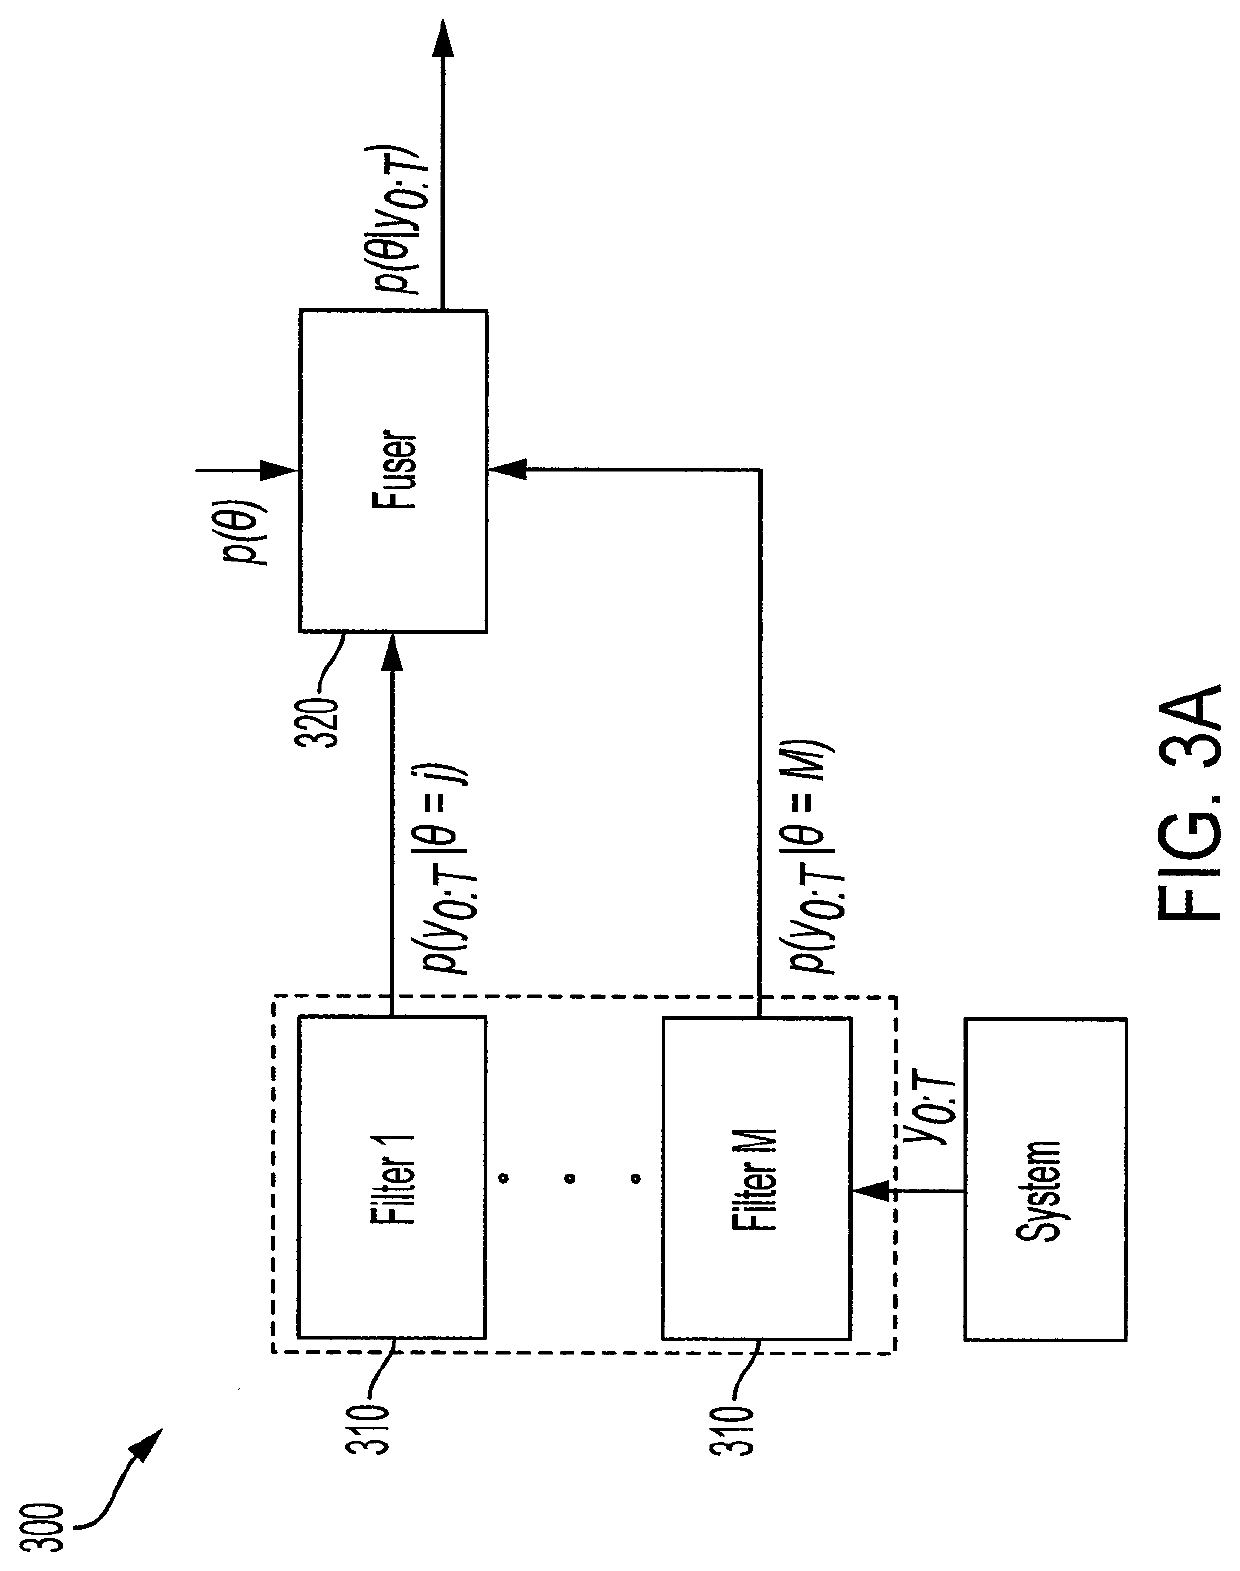 Method for classification based diagnosis with partial system model information